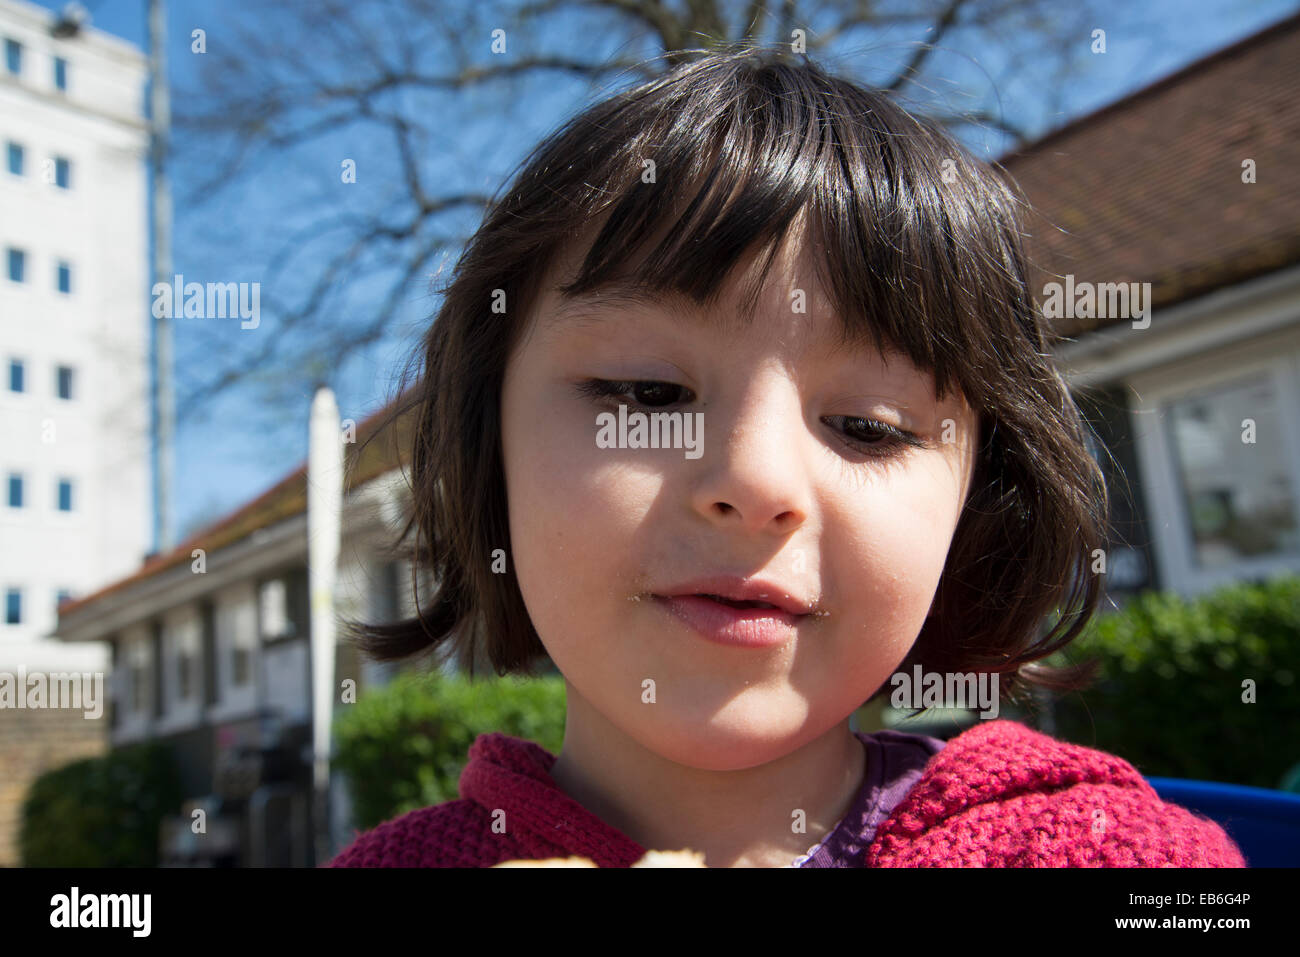 Close up of 5 year old girl's face Banque D'Images